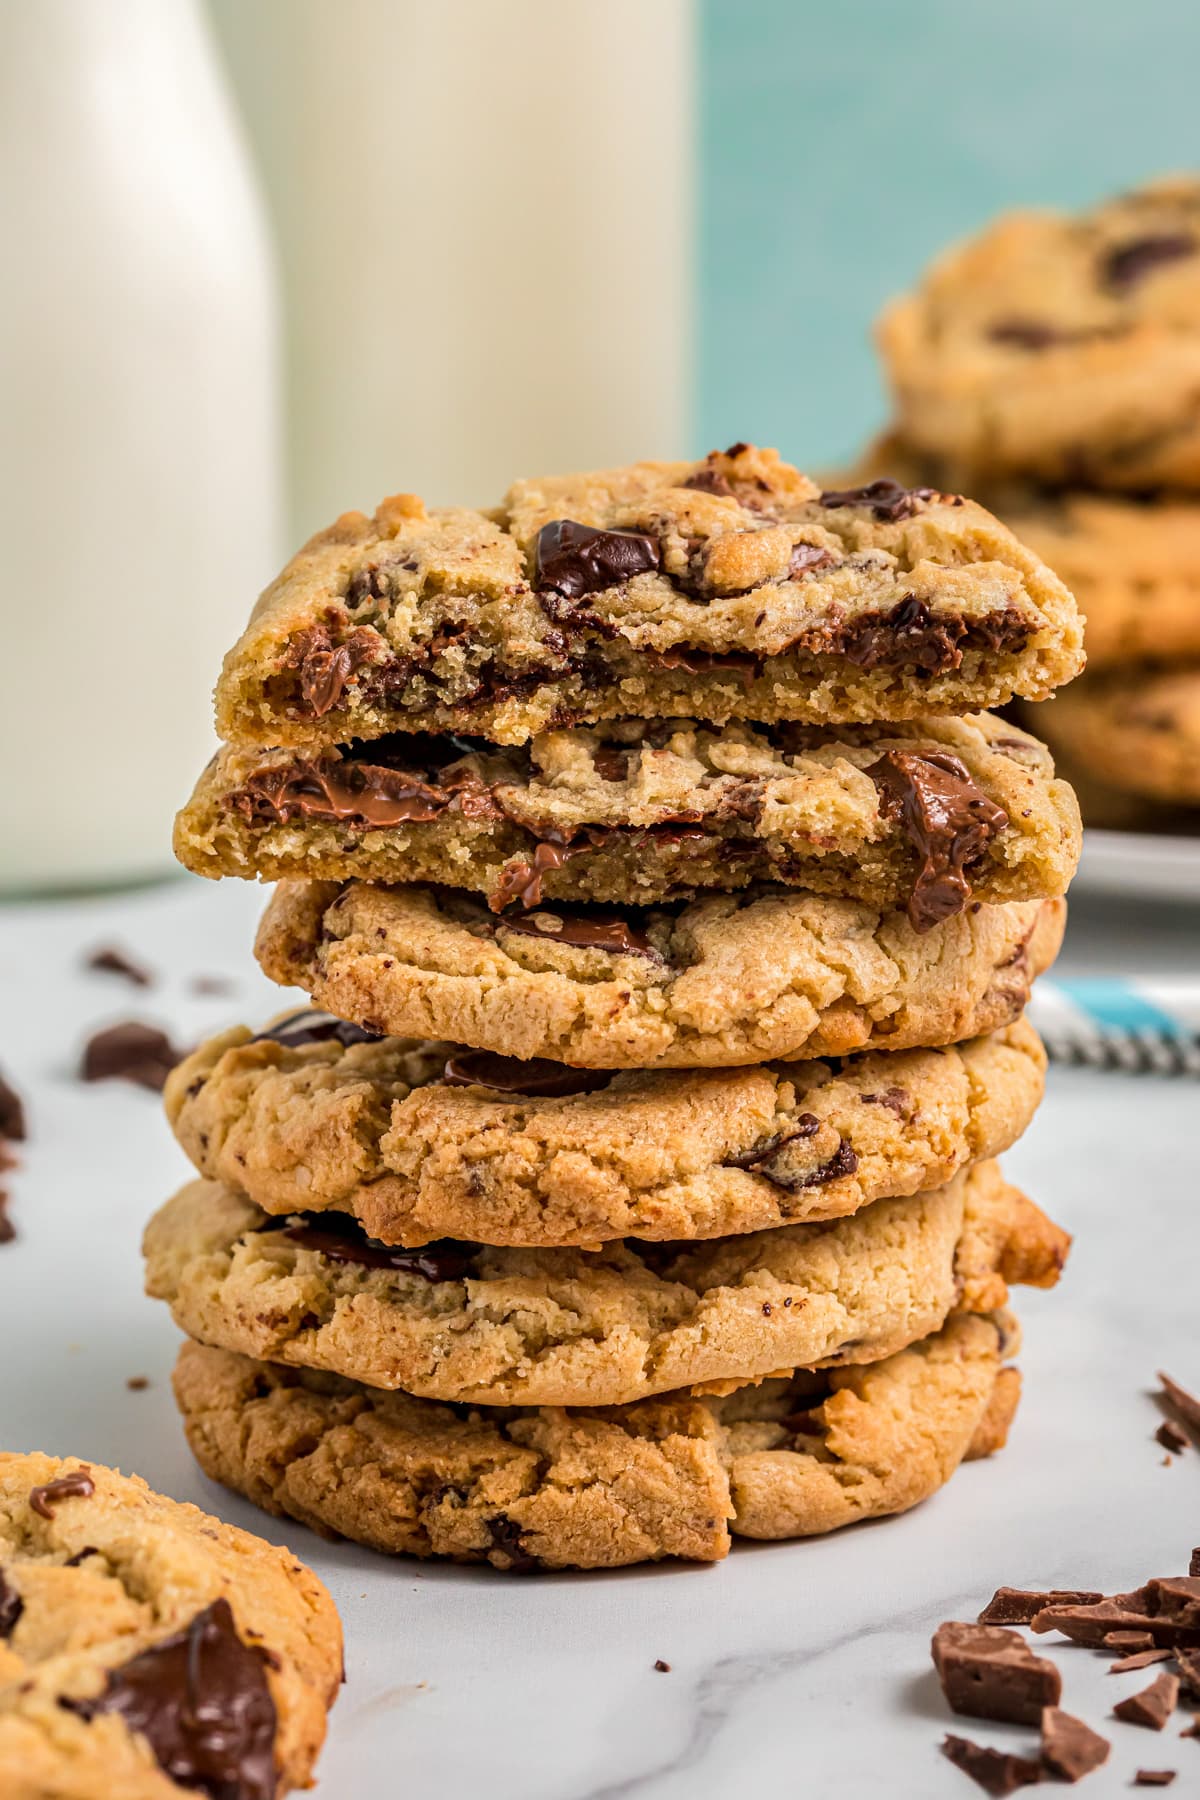 Stacked chocolate chunk cookies recipe image.